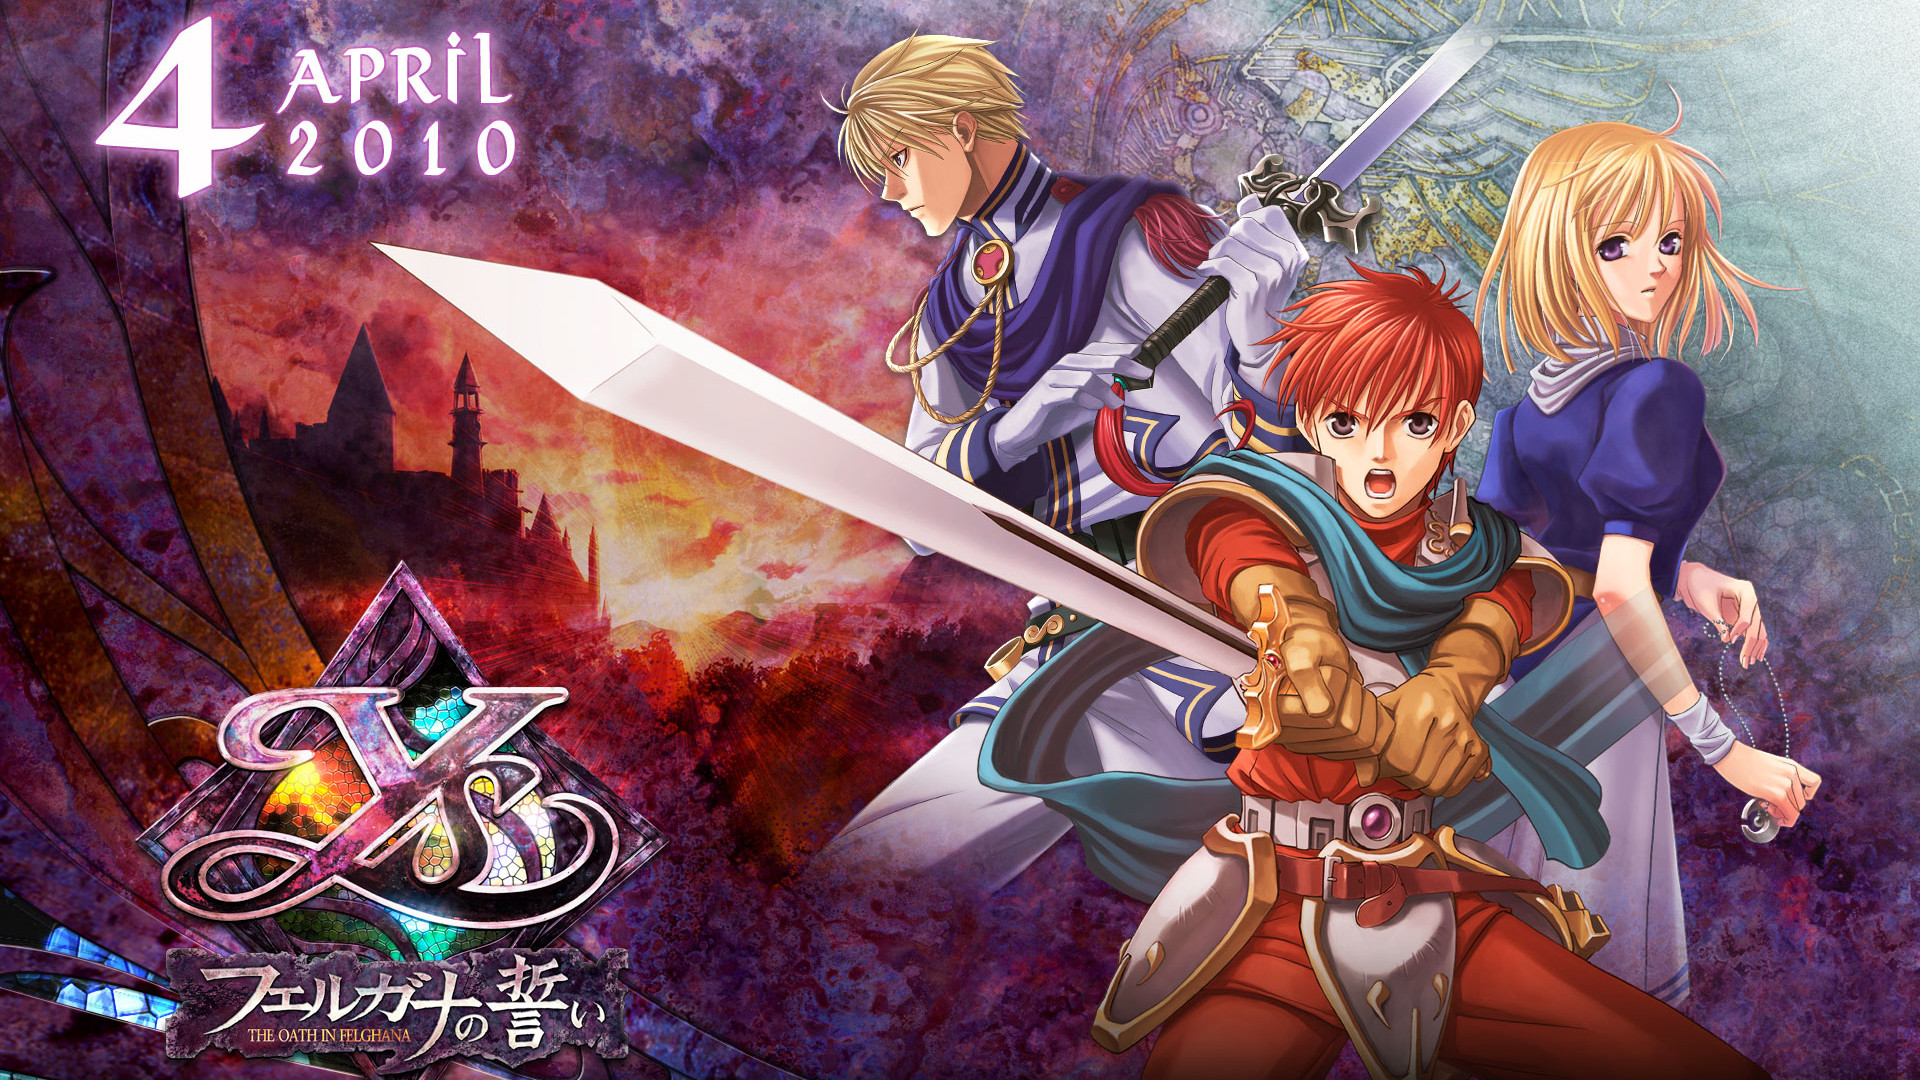 Video Game Ys: The Oath In Felghana HD Wallpaper | Background Image